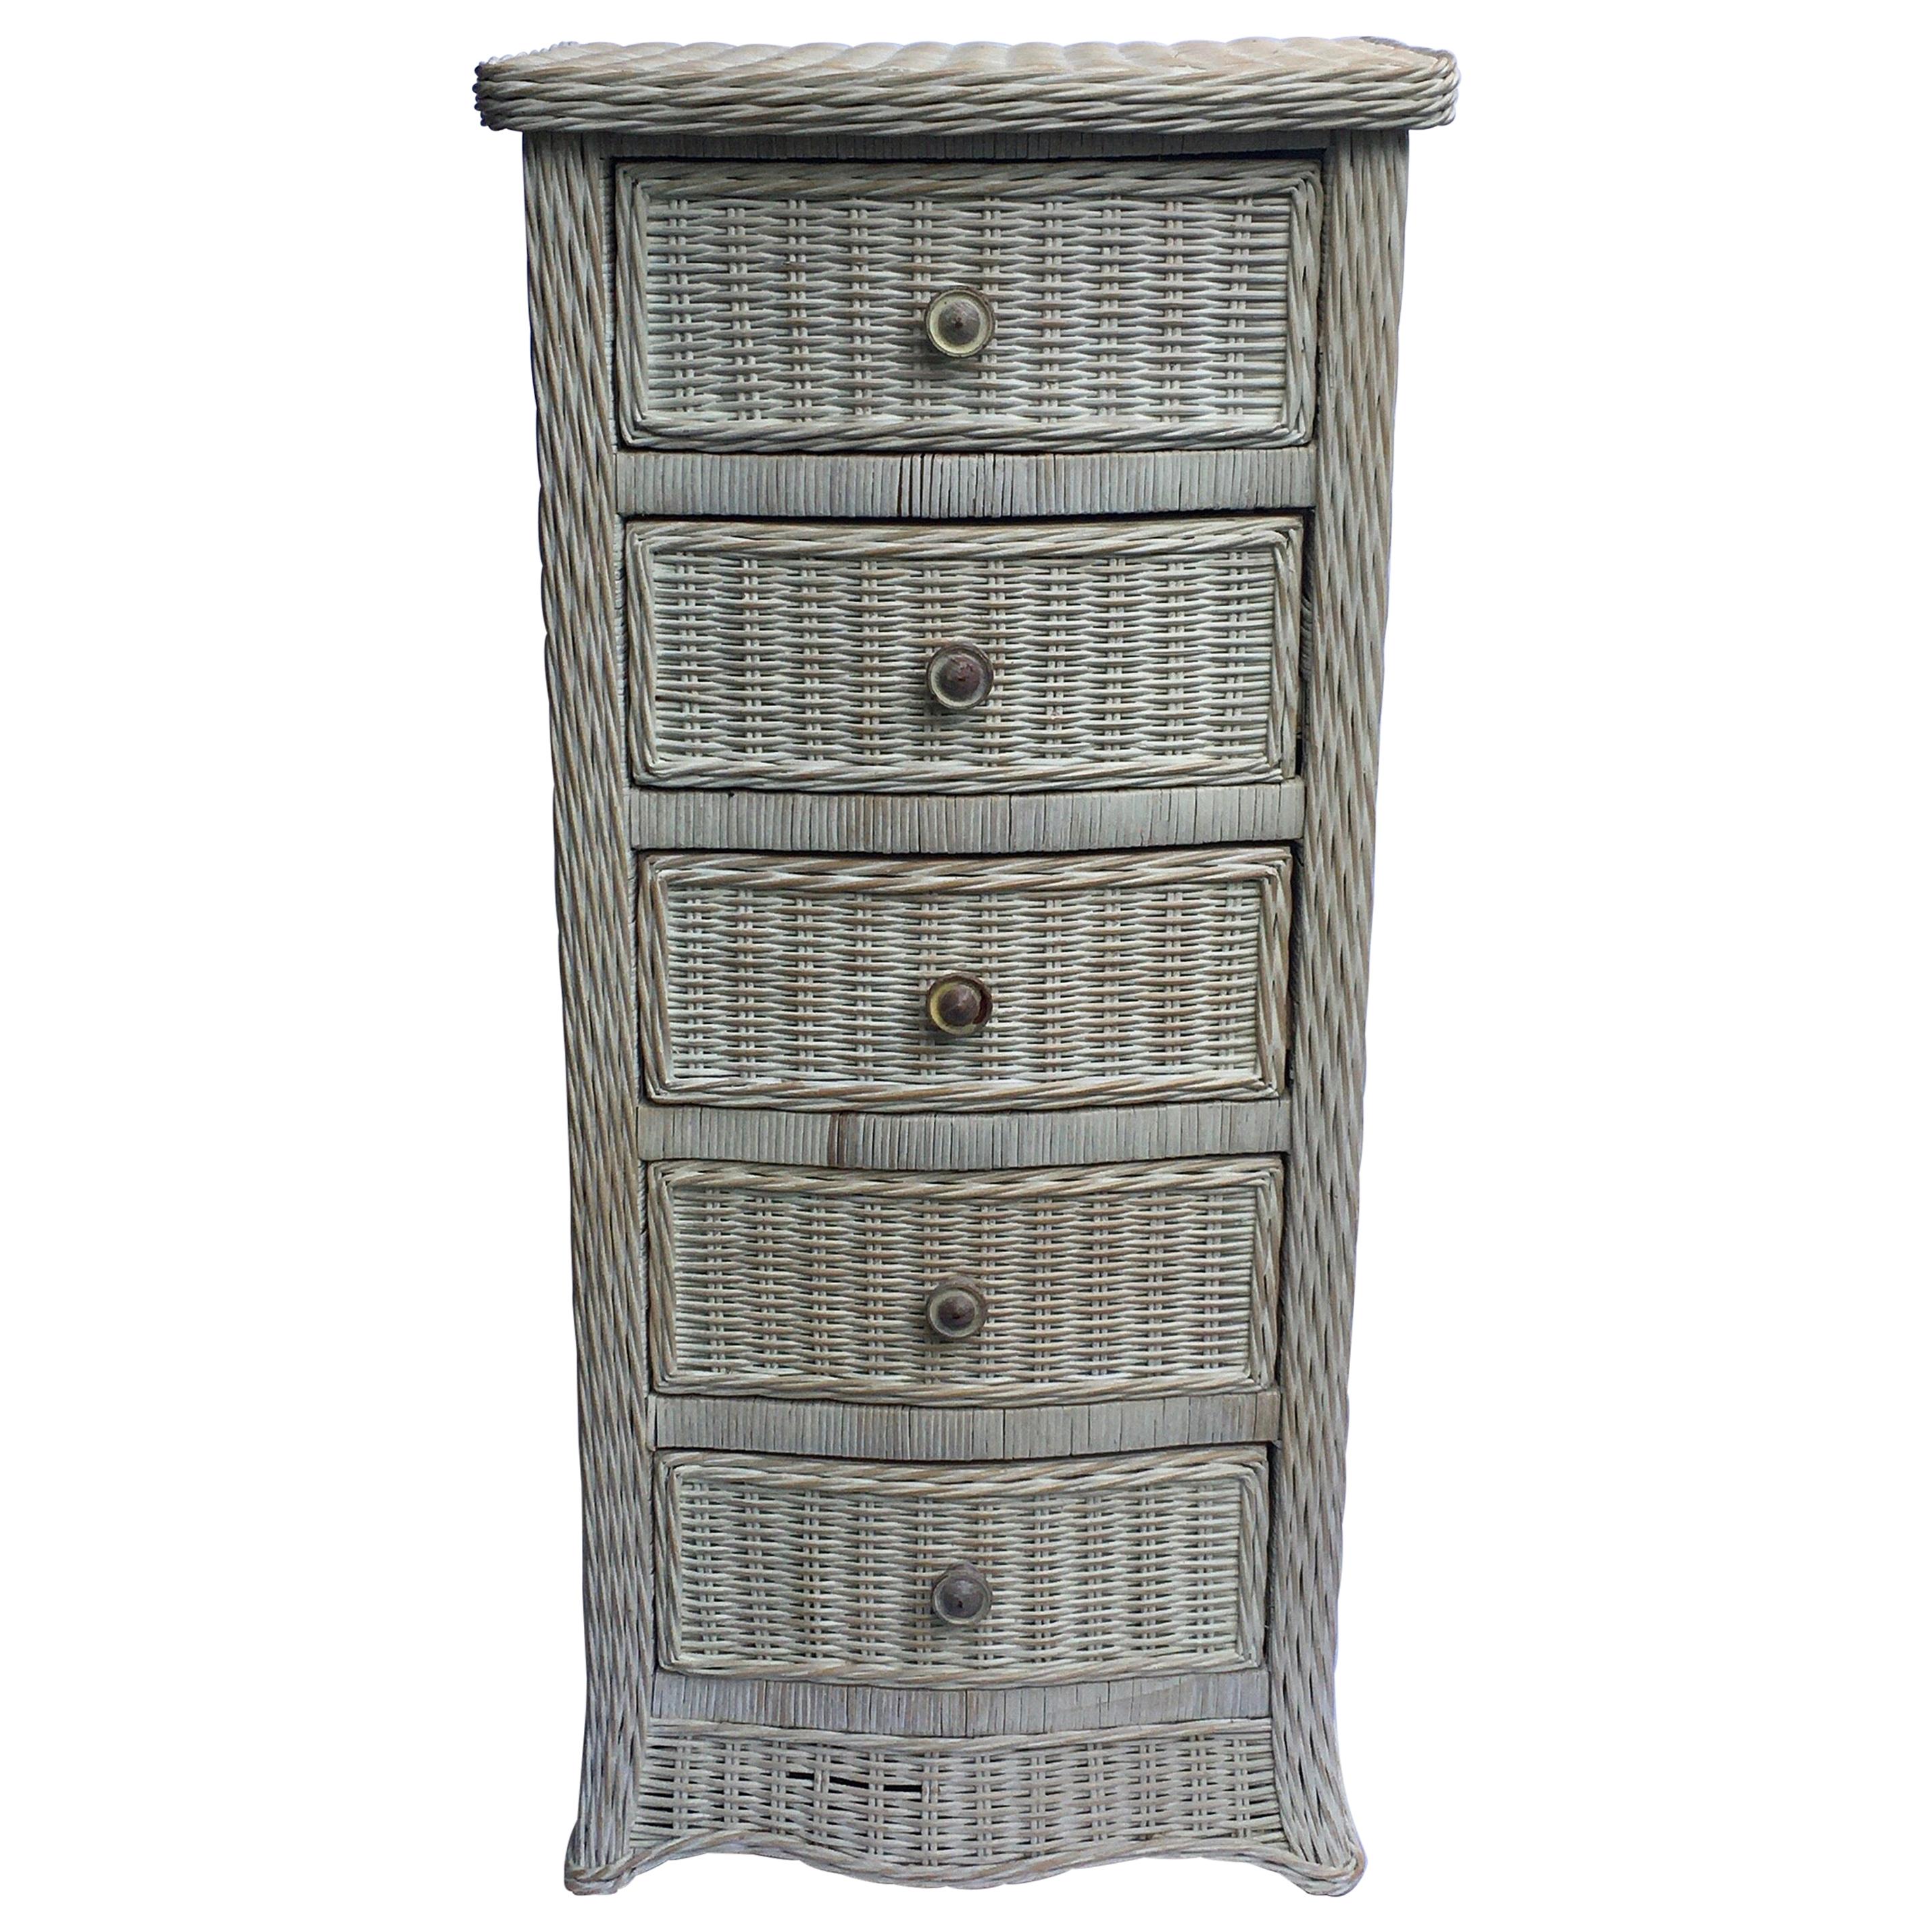 Tall Wicker Curved Serpentine Lingerie Chest of Drawers